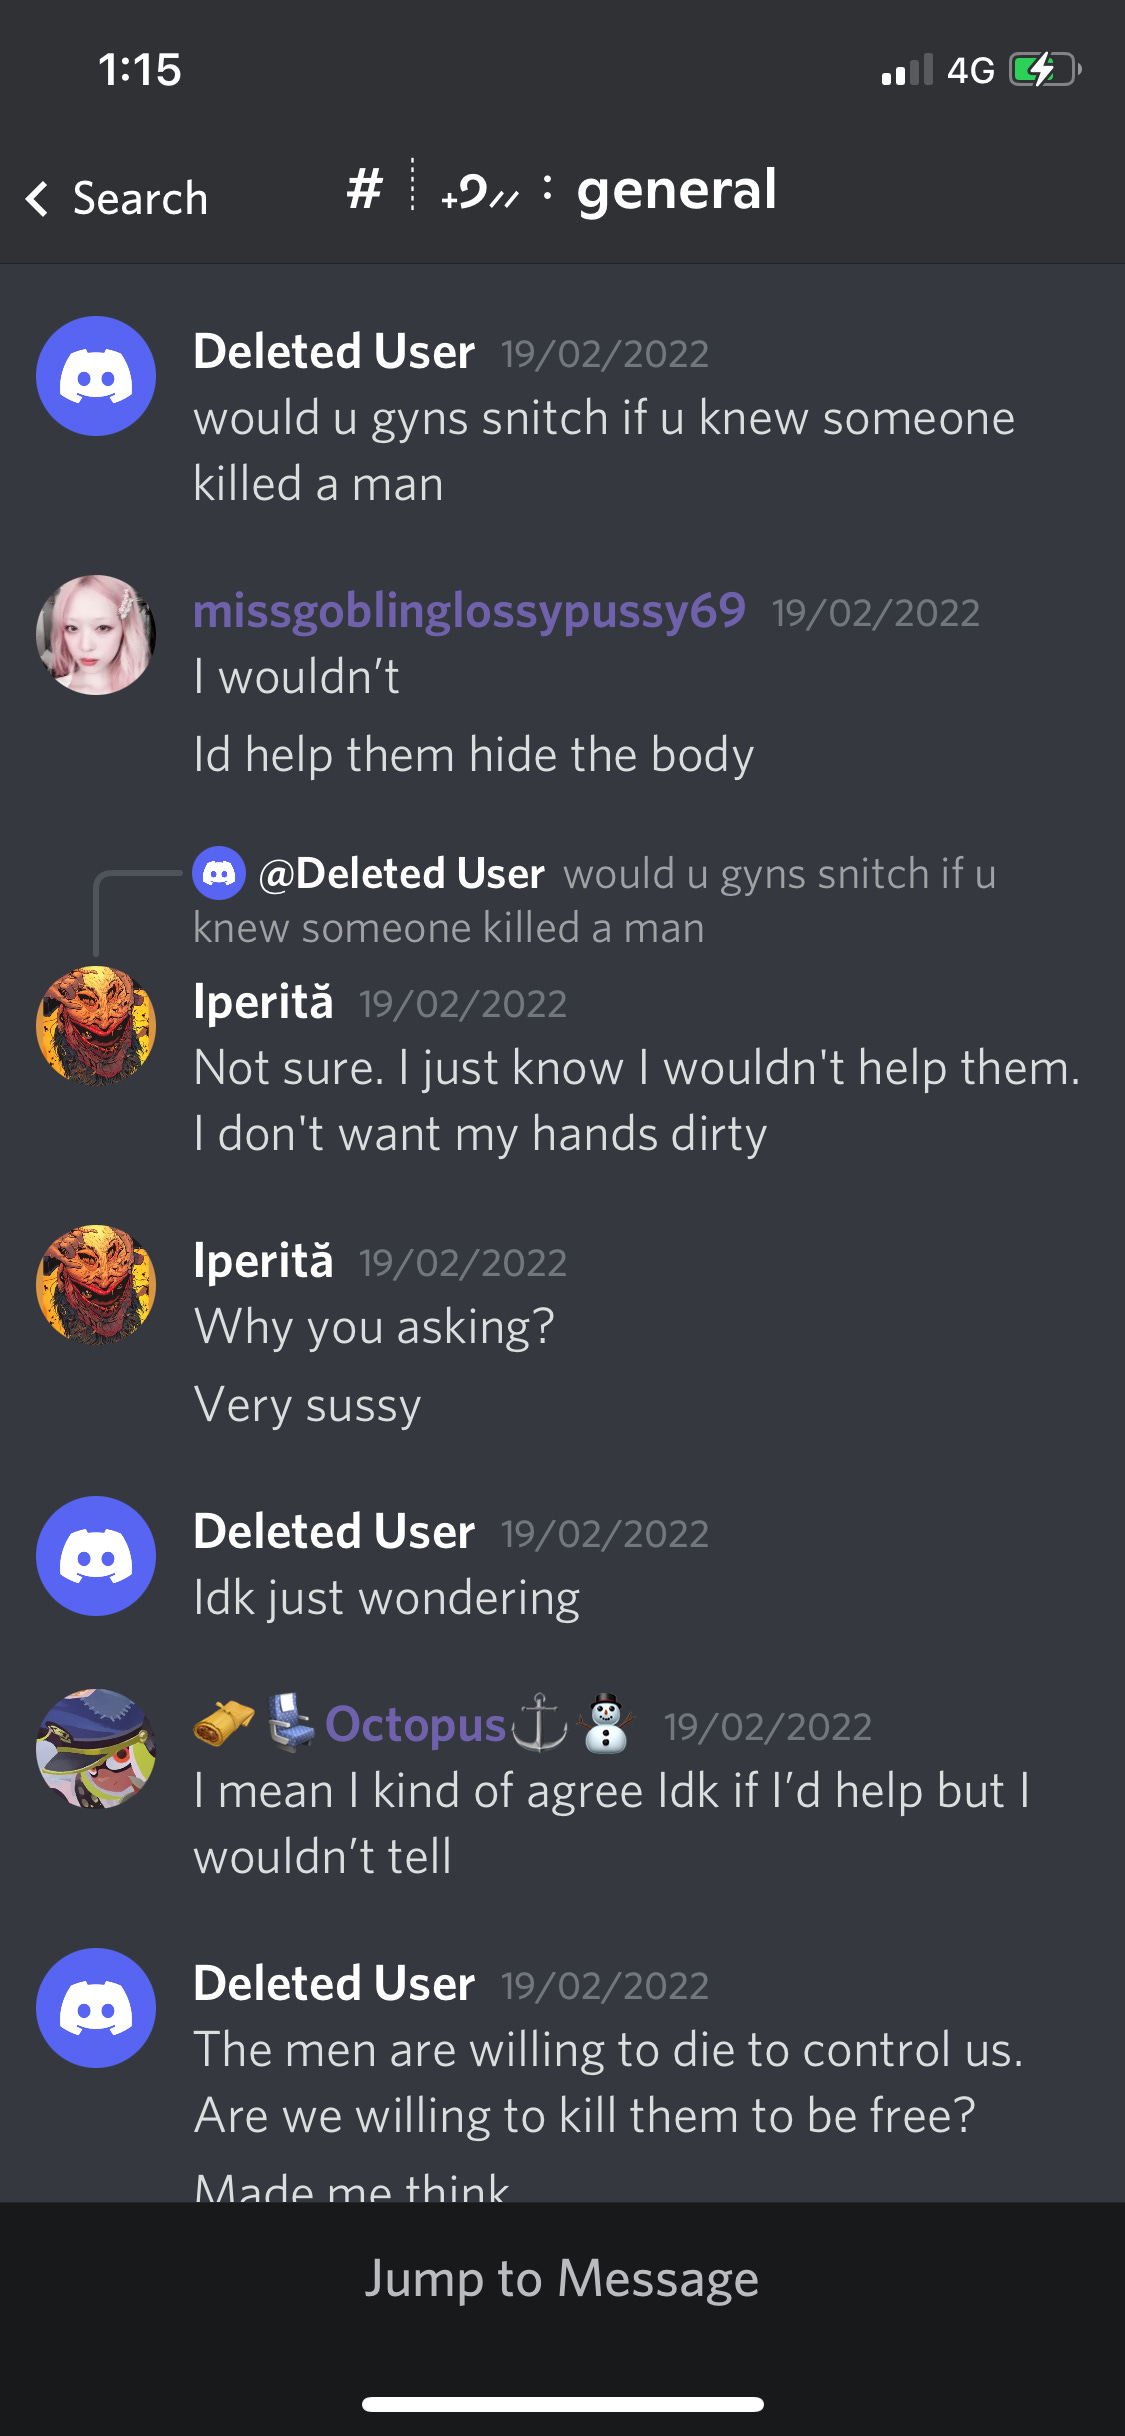 Discord servers tagged with lgbt